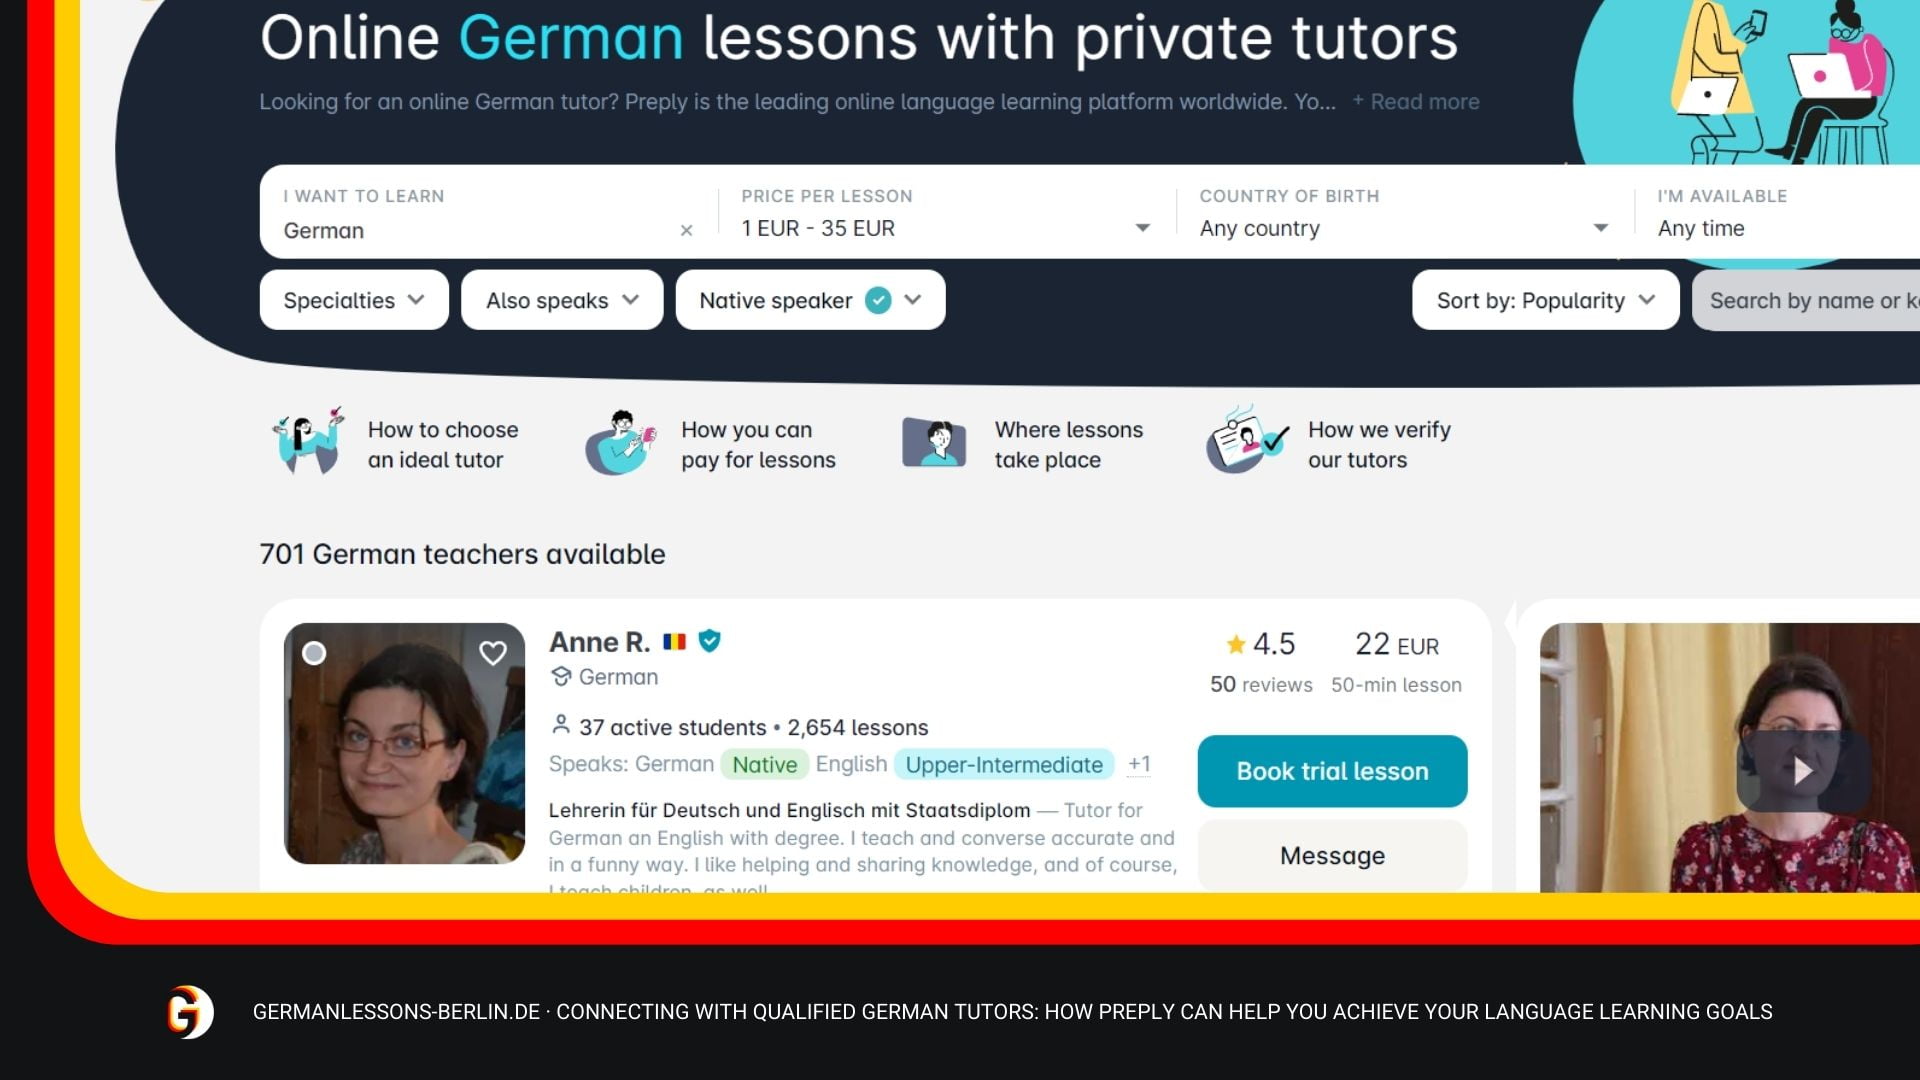 Connecting With Qualified German Tutors